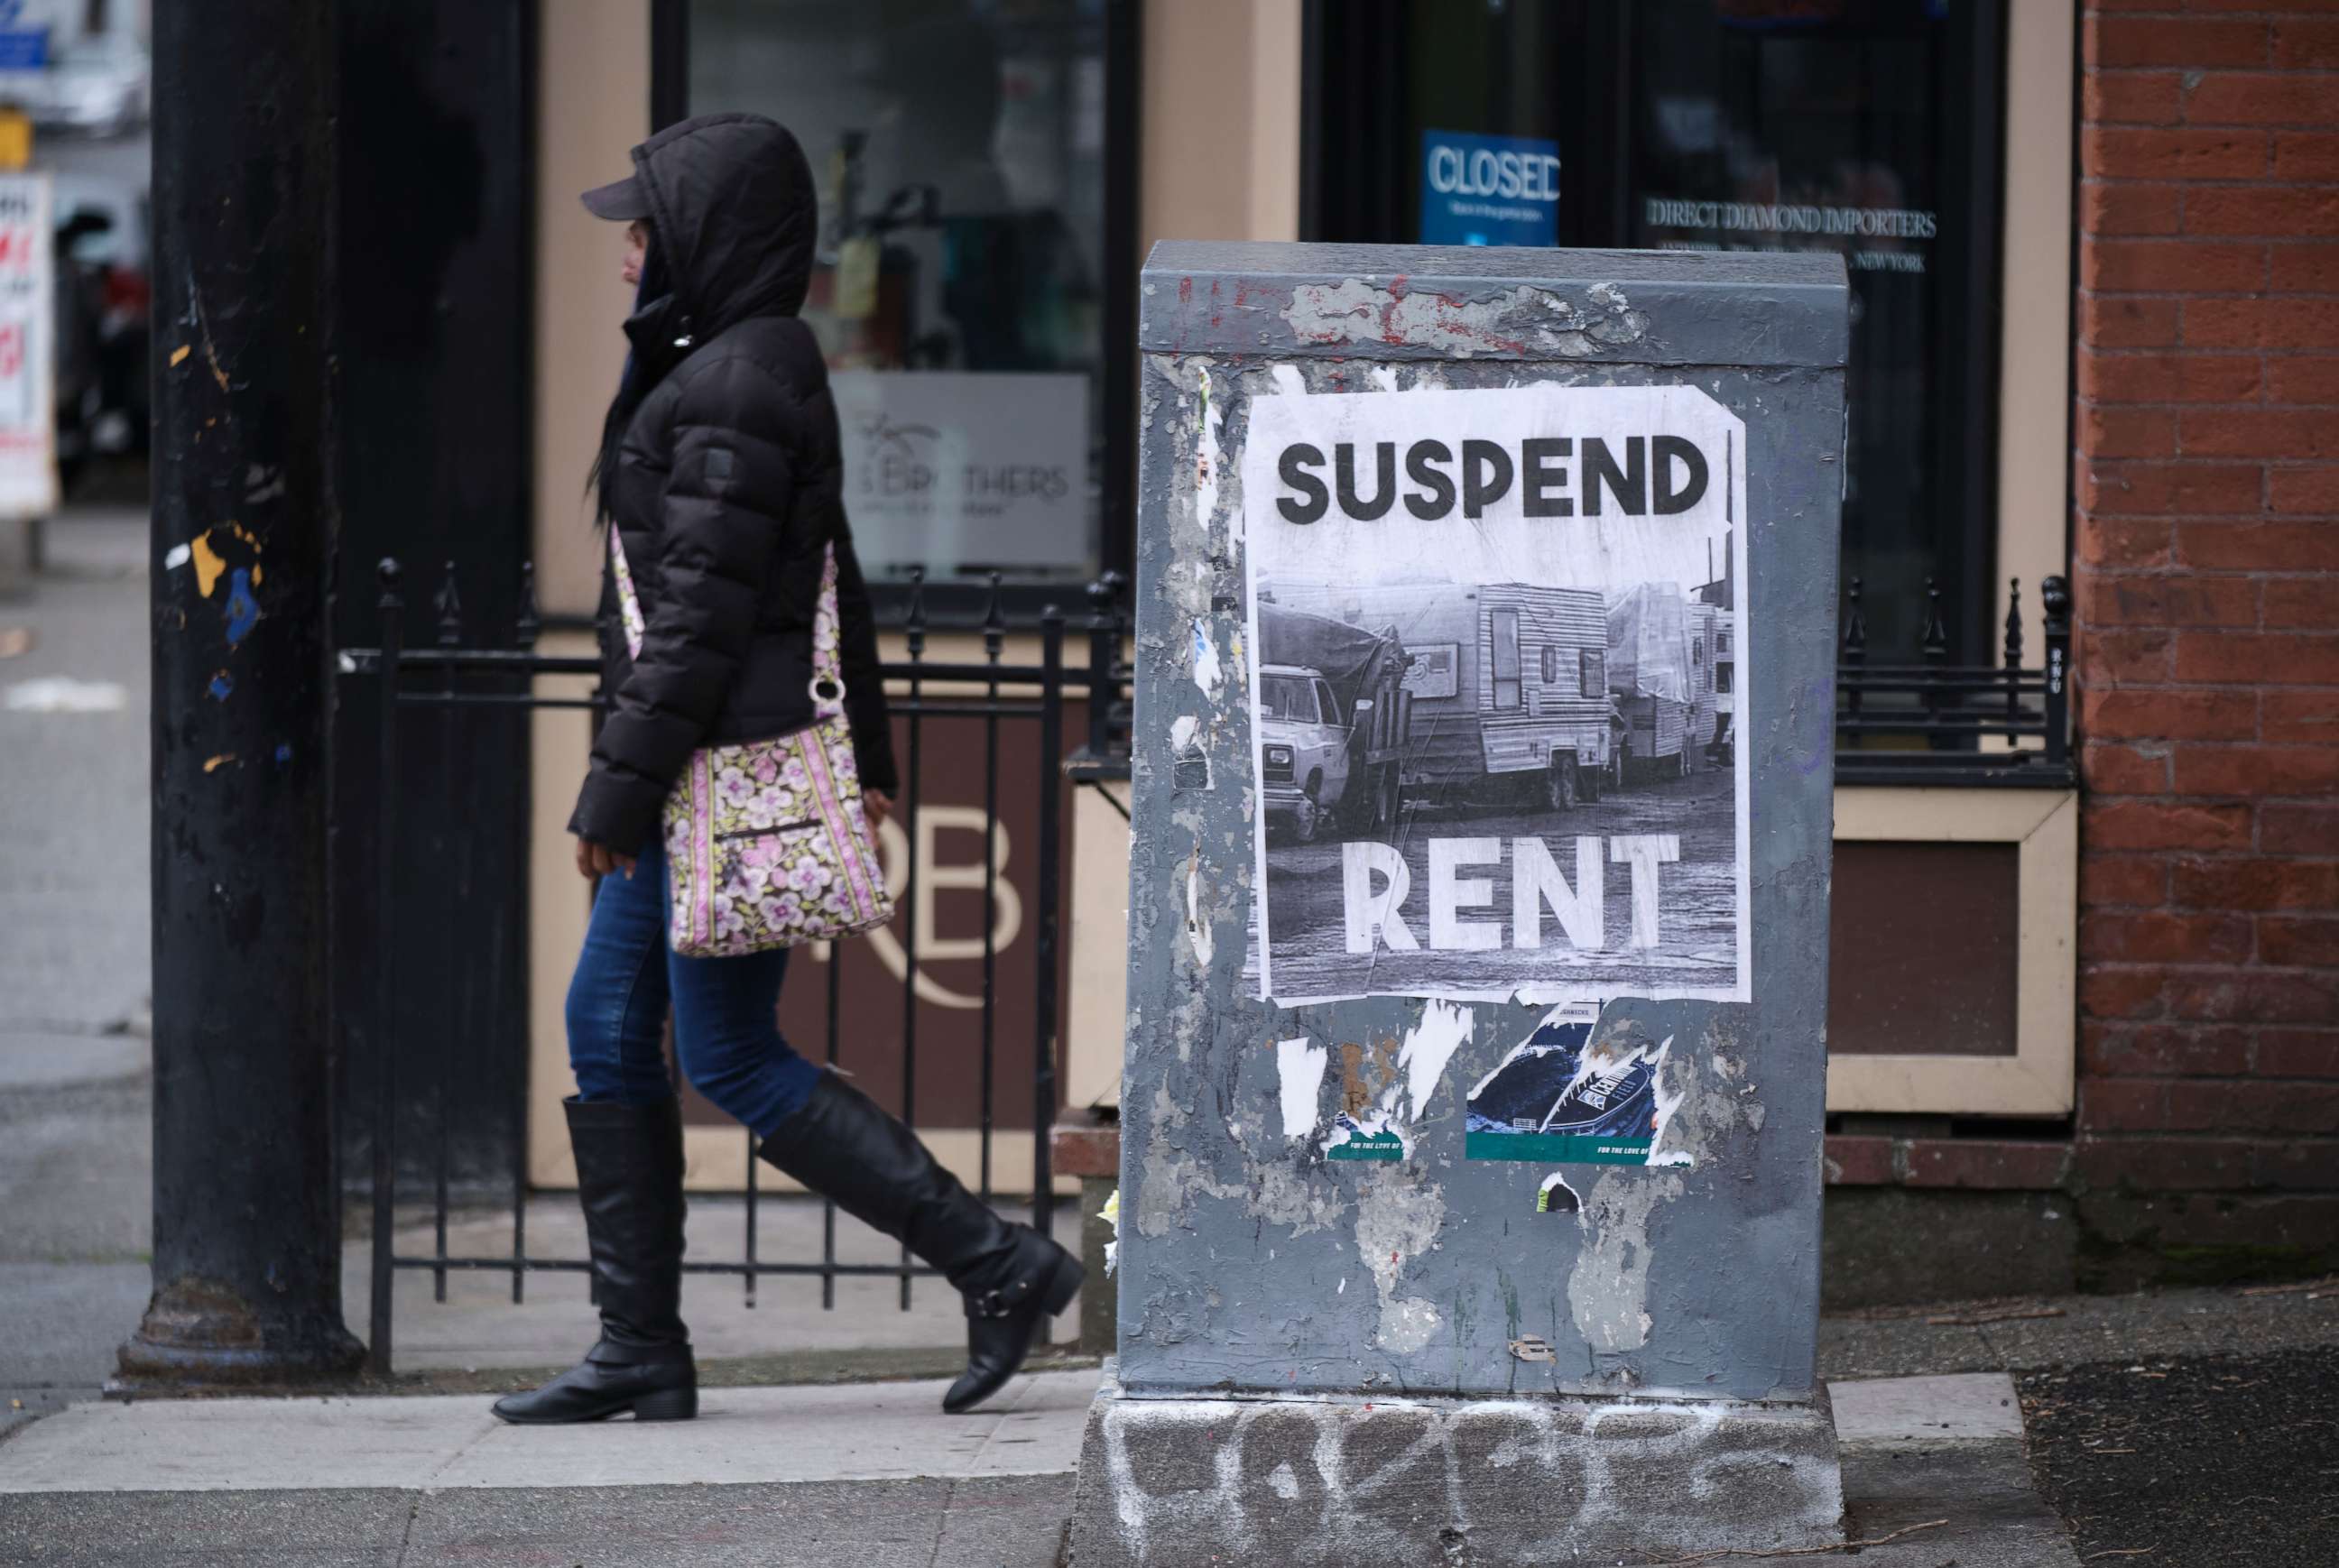 PHOTO: A sign calling for the suspension of rent during the COVID-19 outbreak is pictured in downtown Seattle, March 26, 2020. Unemployment claims in the area have shot up recently as the economy had ground to a halt.